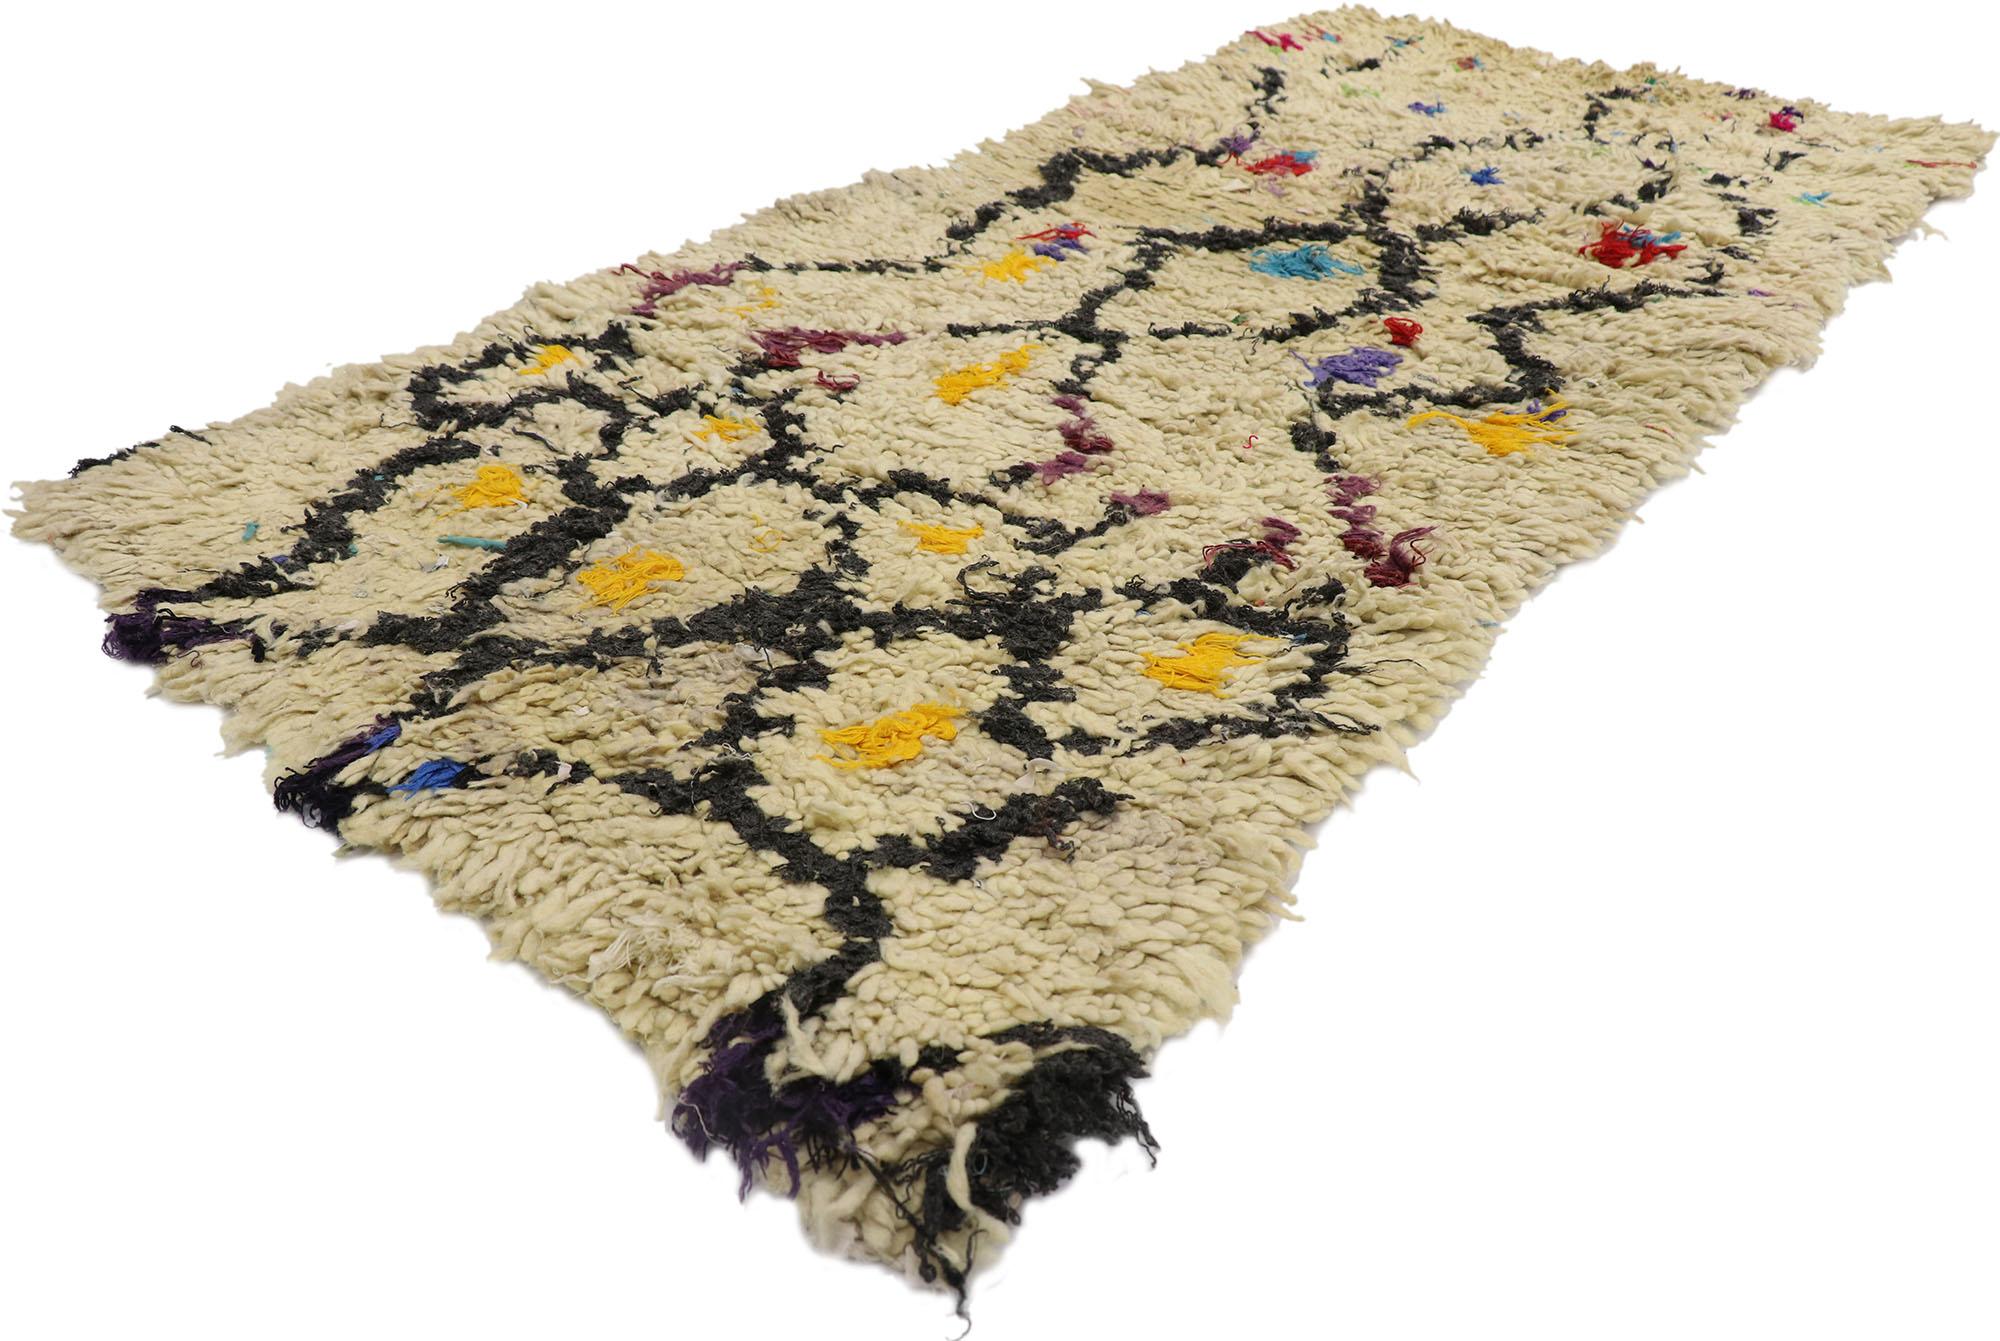 21594 vintage Berber Boucherouite Moroccan rug with Boho Chic Tribal style 02'08 x 05'08. Showcasing a bold expressive design, incredible detail and texture, this hand knotted cotton and wool vintage Berber Boucherouite Moroccan rug is a captivating